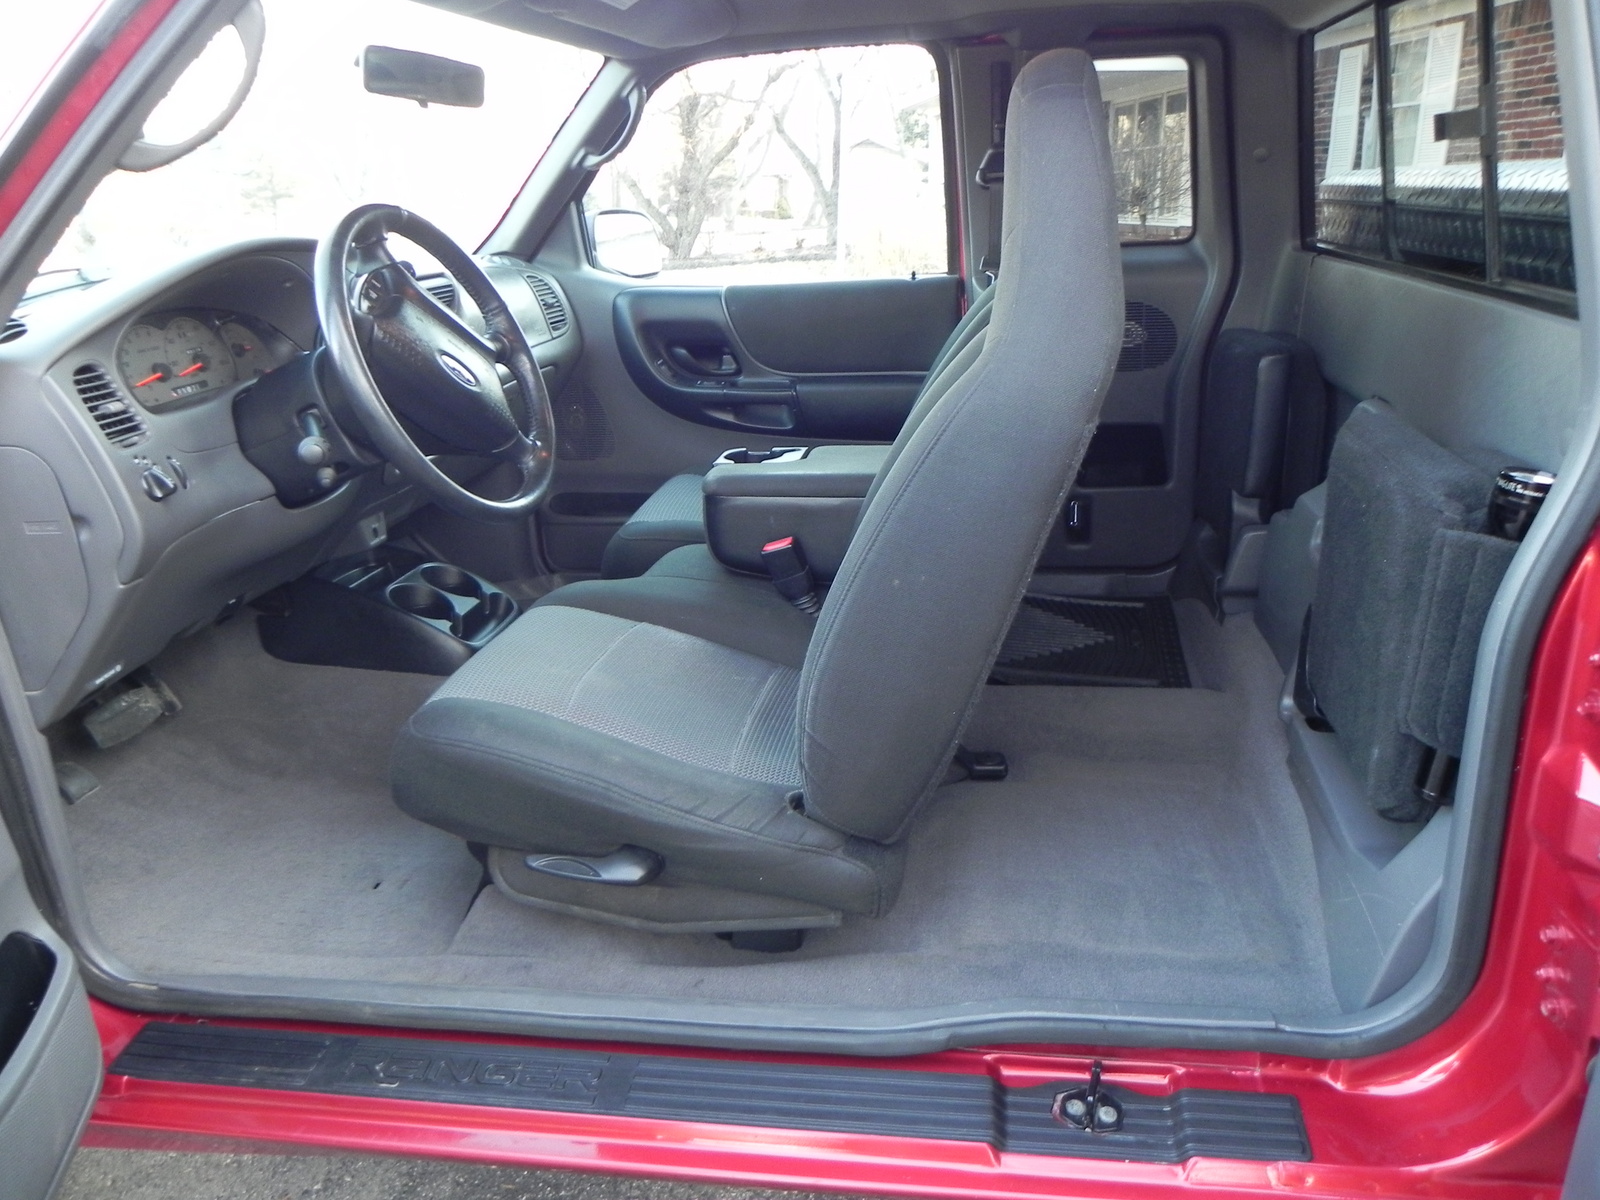 2003 Ford ranger interior pictures #9